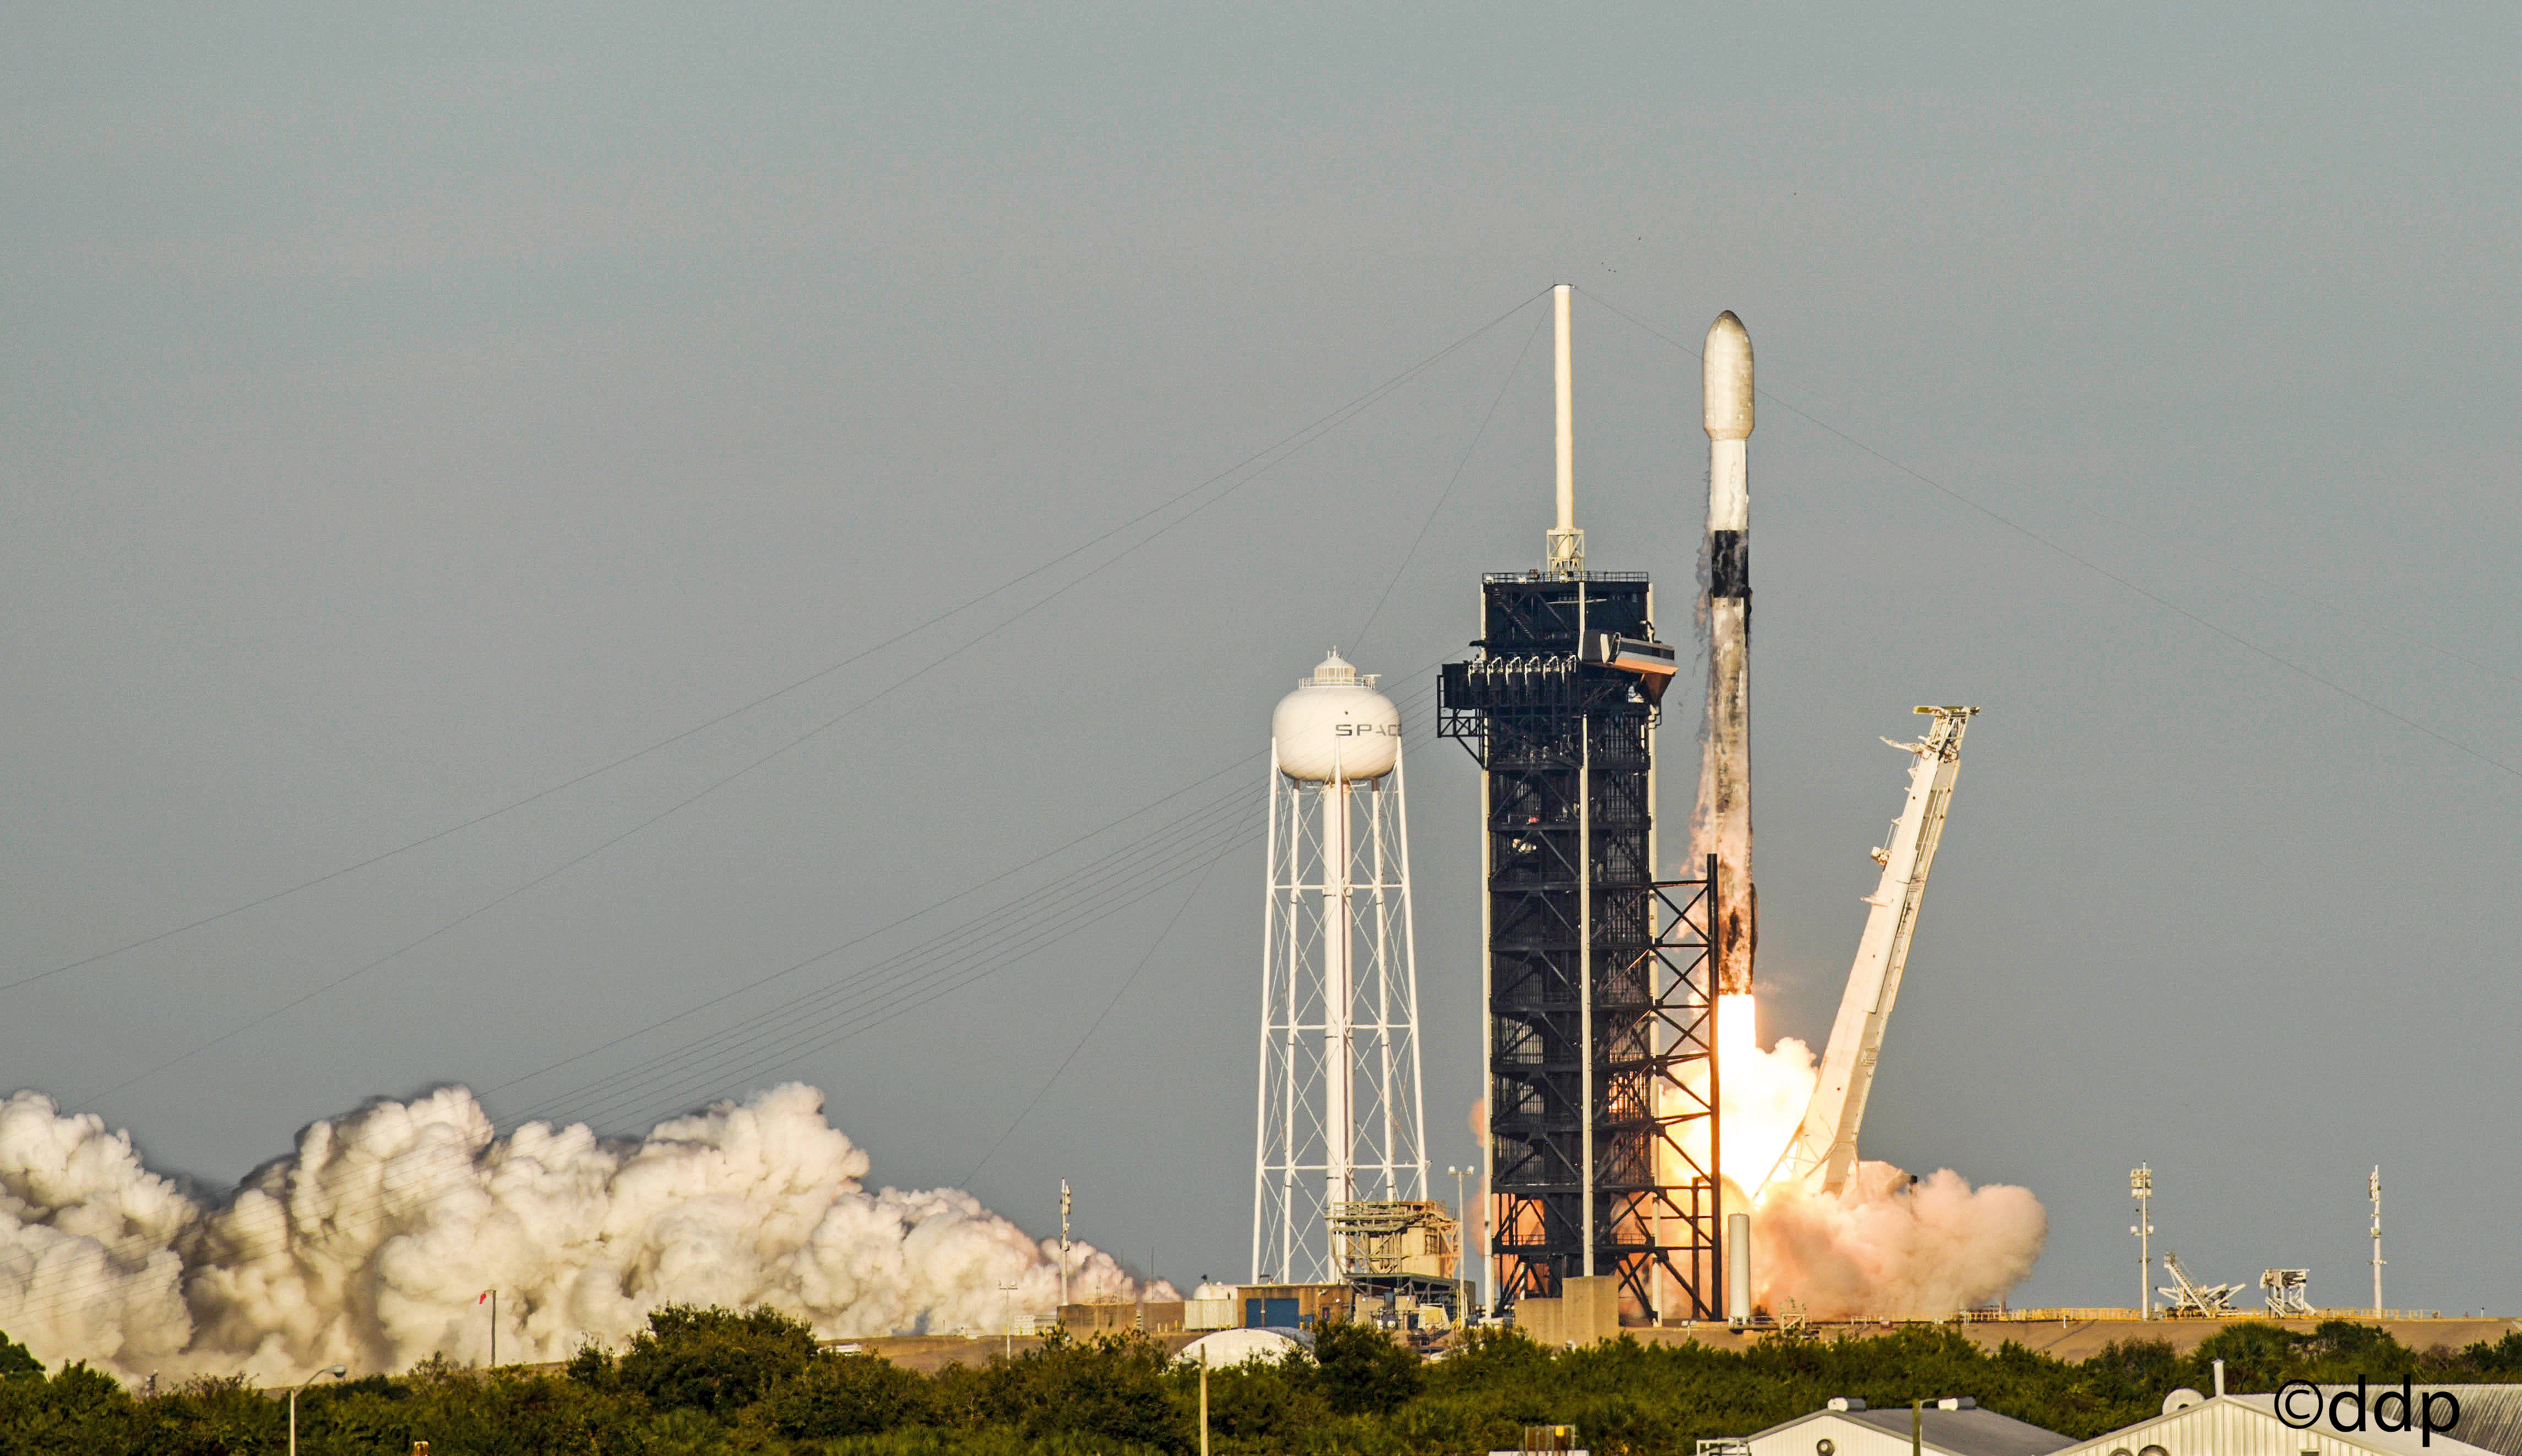 The launch of a SpaceX Falcon 9 rocket carrying satellites